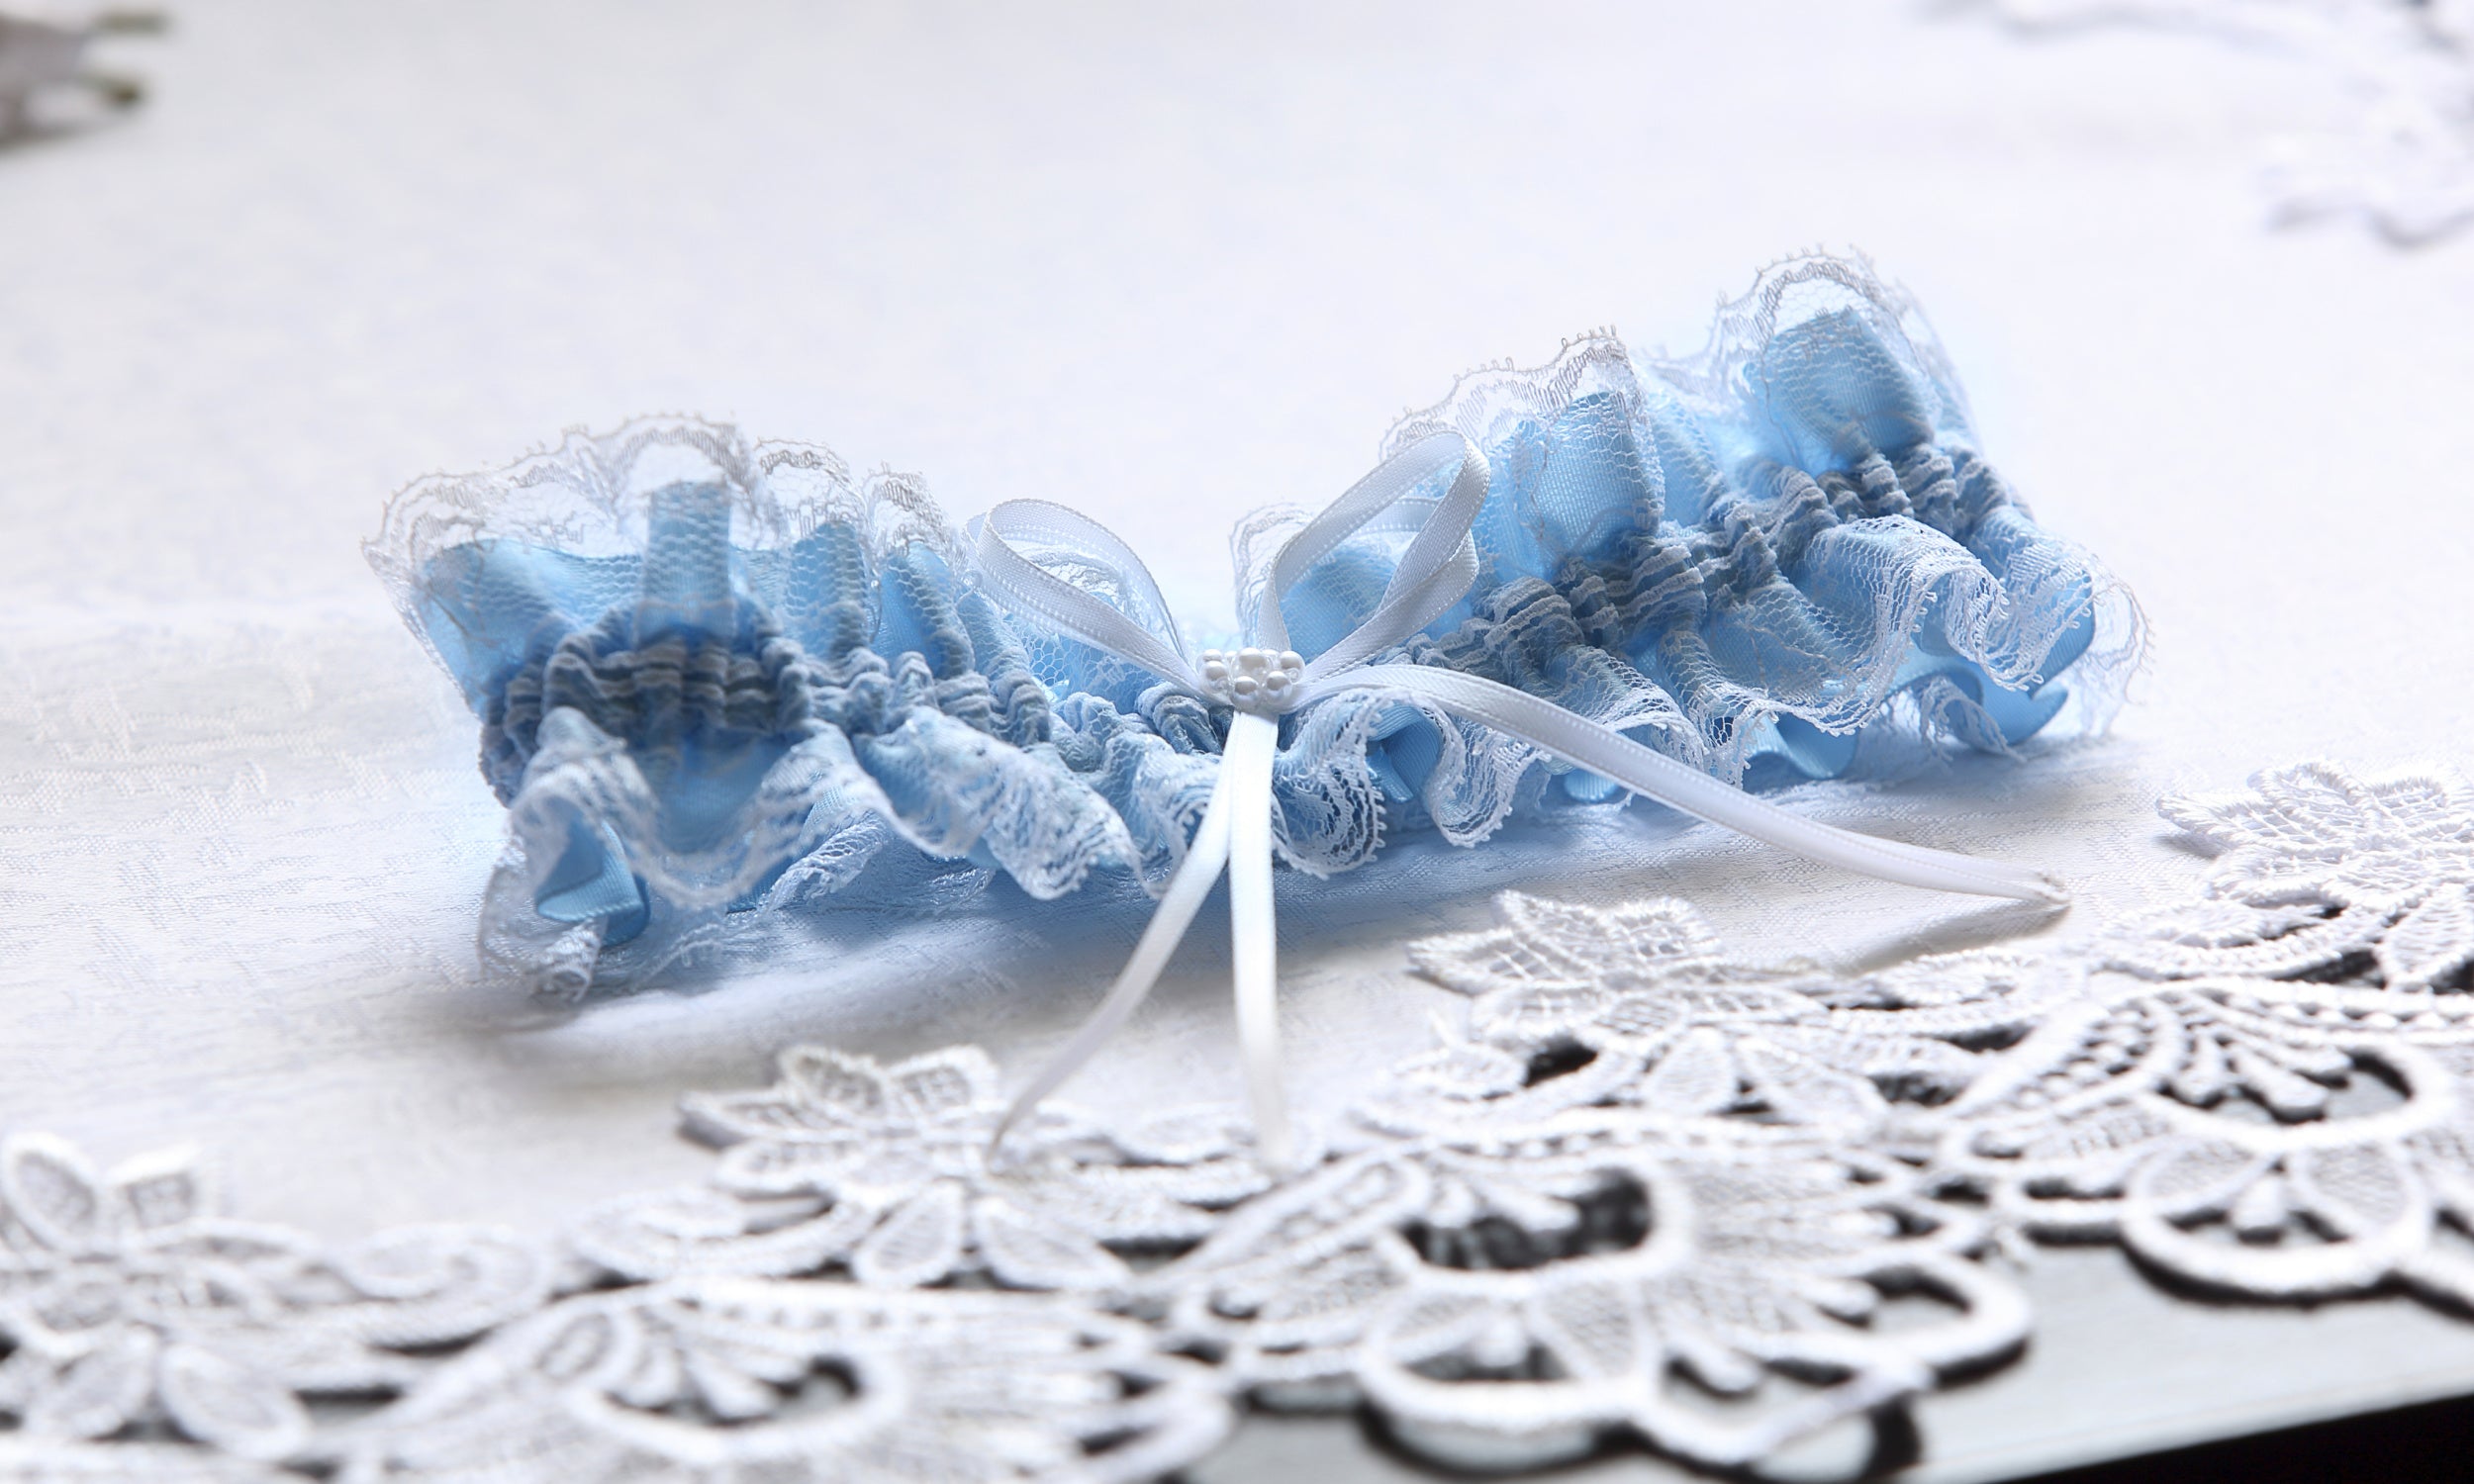 The Wedding Garter Tradition: What's It All About and How to